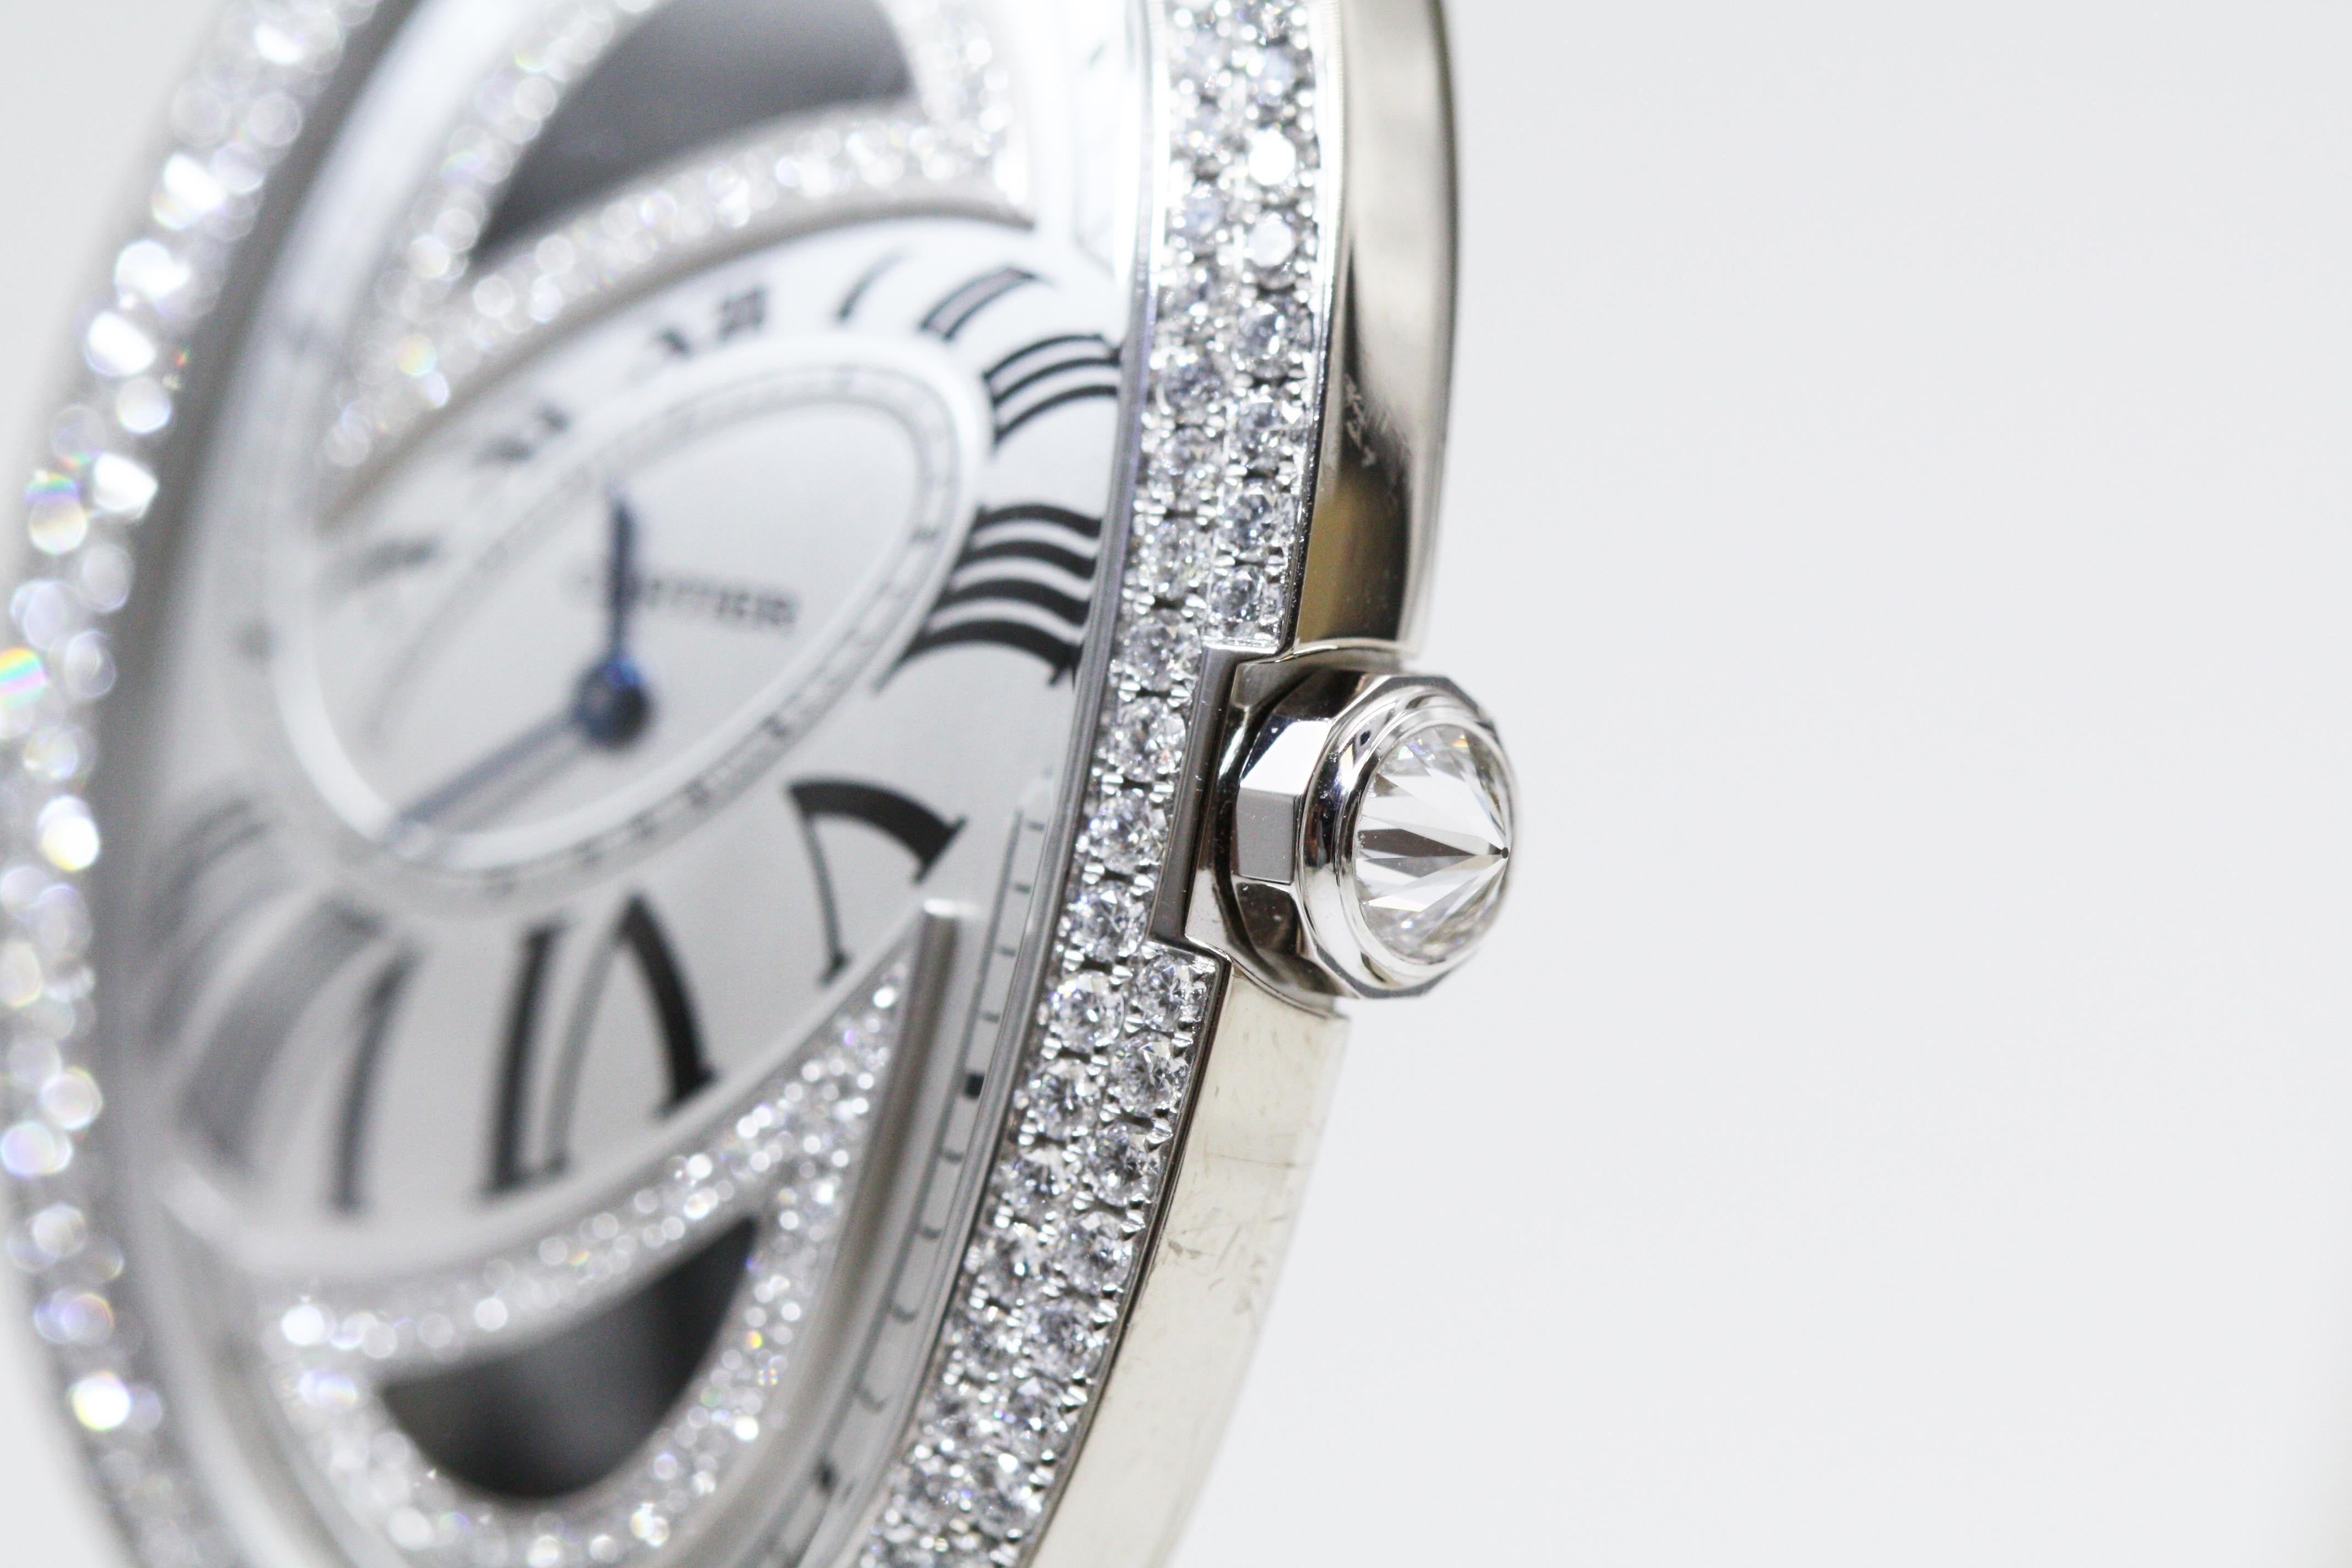 This is one of the prestigious brand Cartier's design, an incredible and glamorous watch; Cartier named this collection as Baignoire, like all of Cartier products, this piece of art is made with 18k white gold and brilliant diamonds, without a doubt